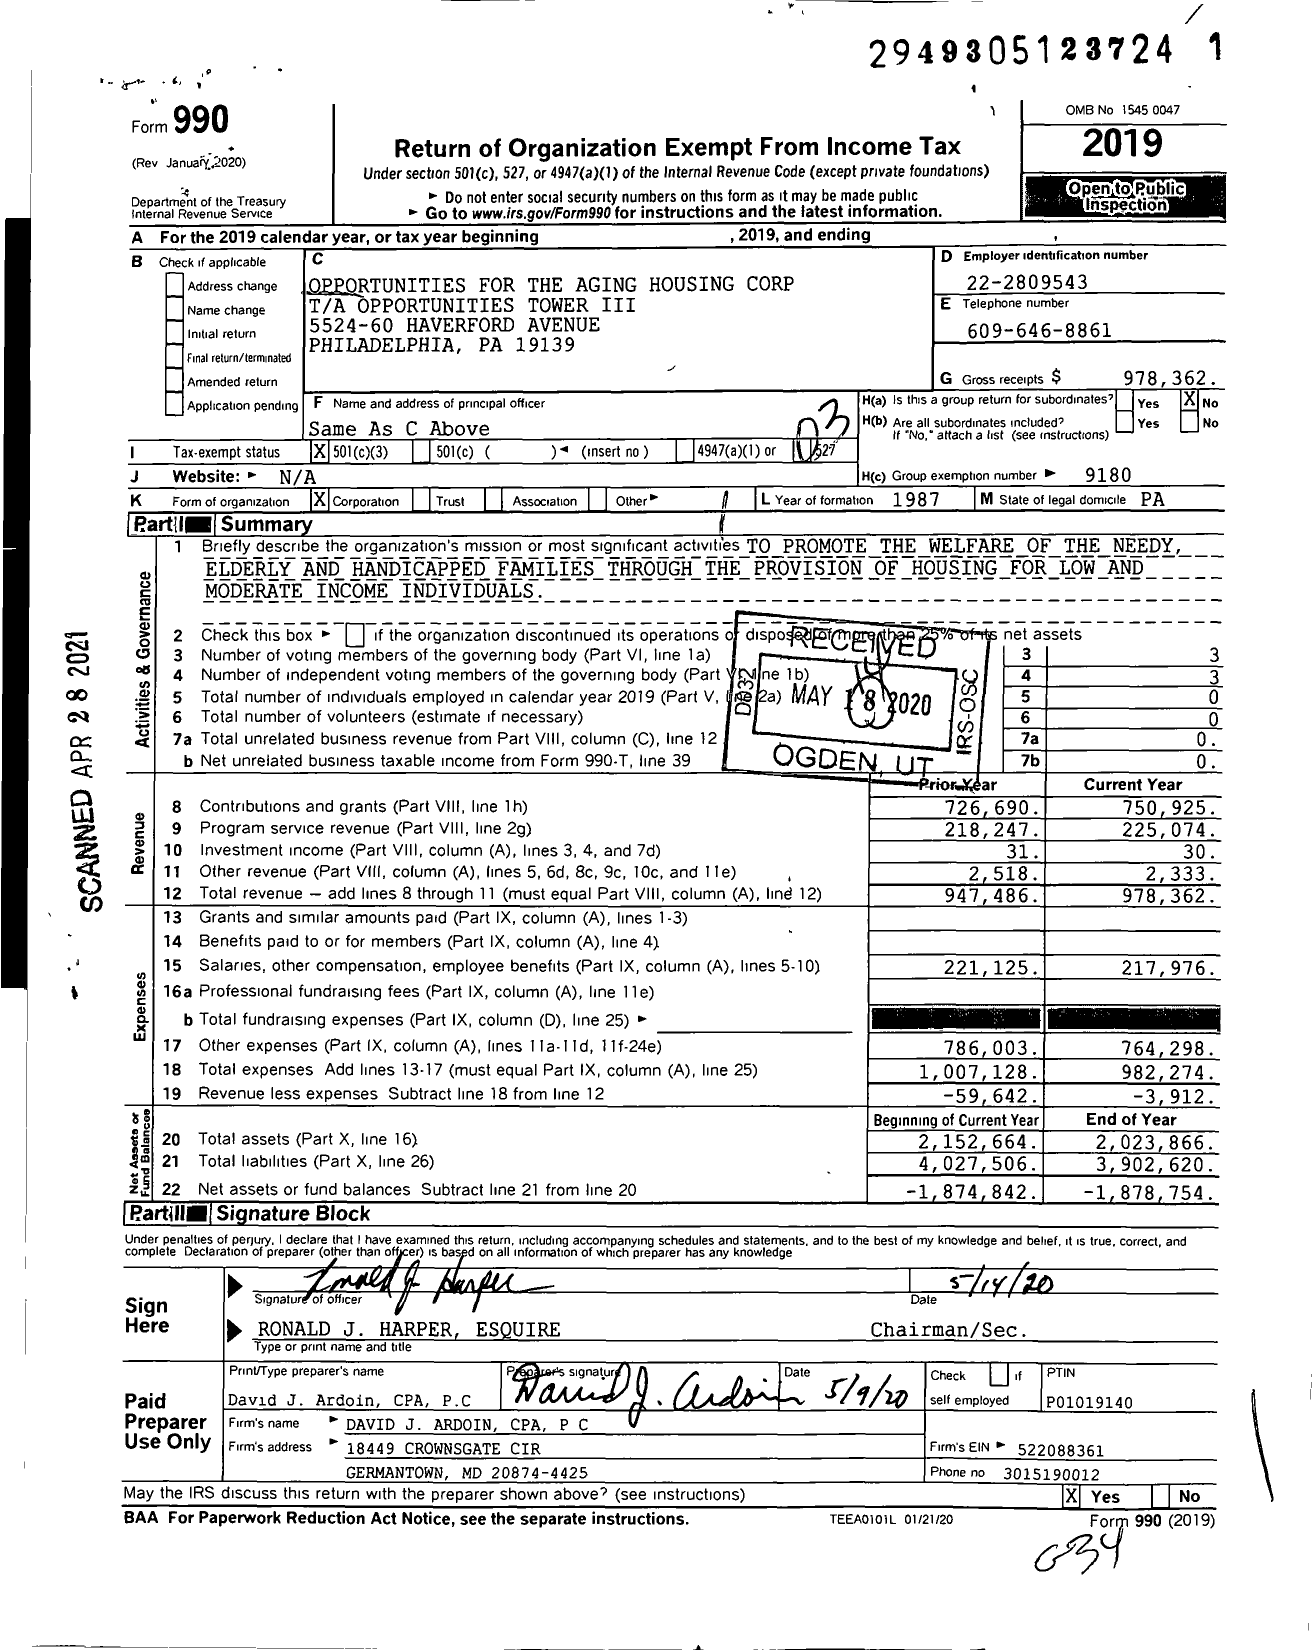 Image of first page of 2019 Form 990 for Opportunities for the Aging Housing Corp Ta Opportunities Tower Iii